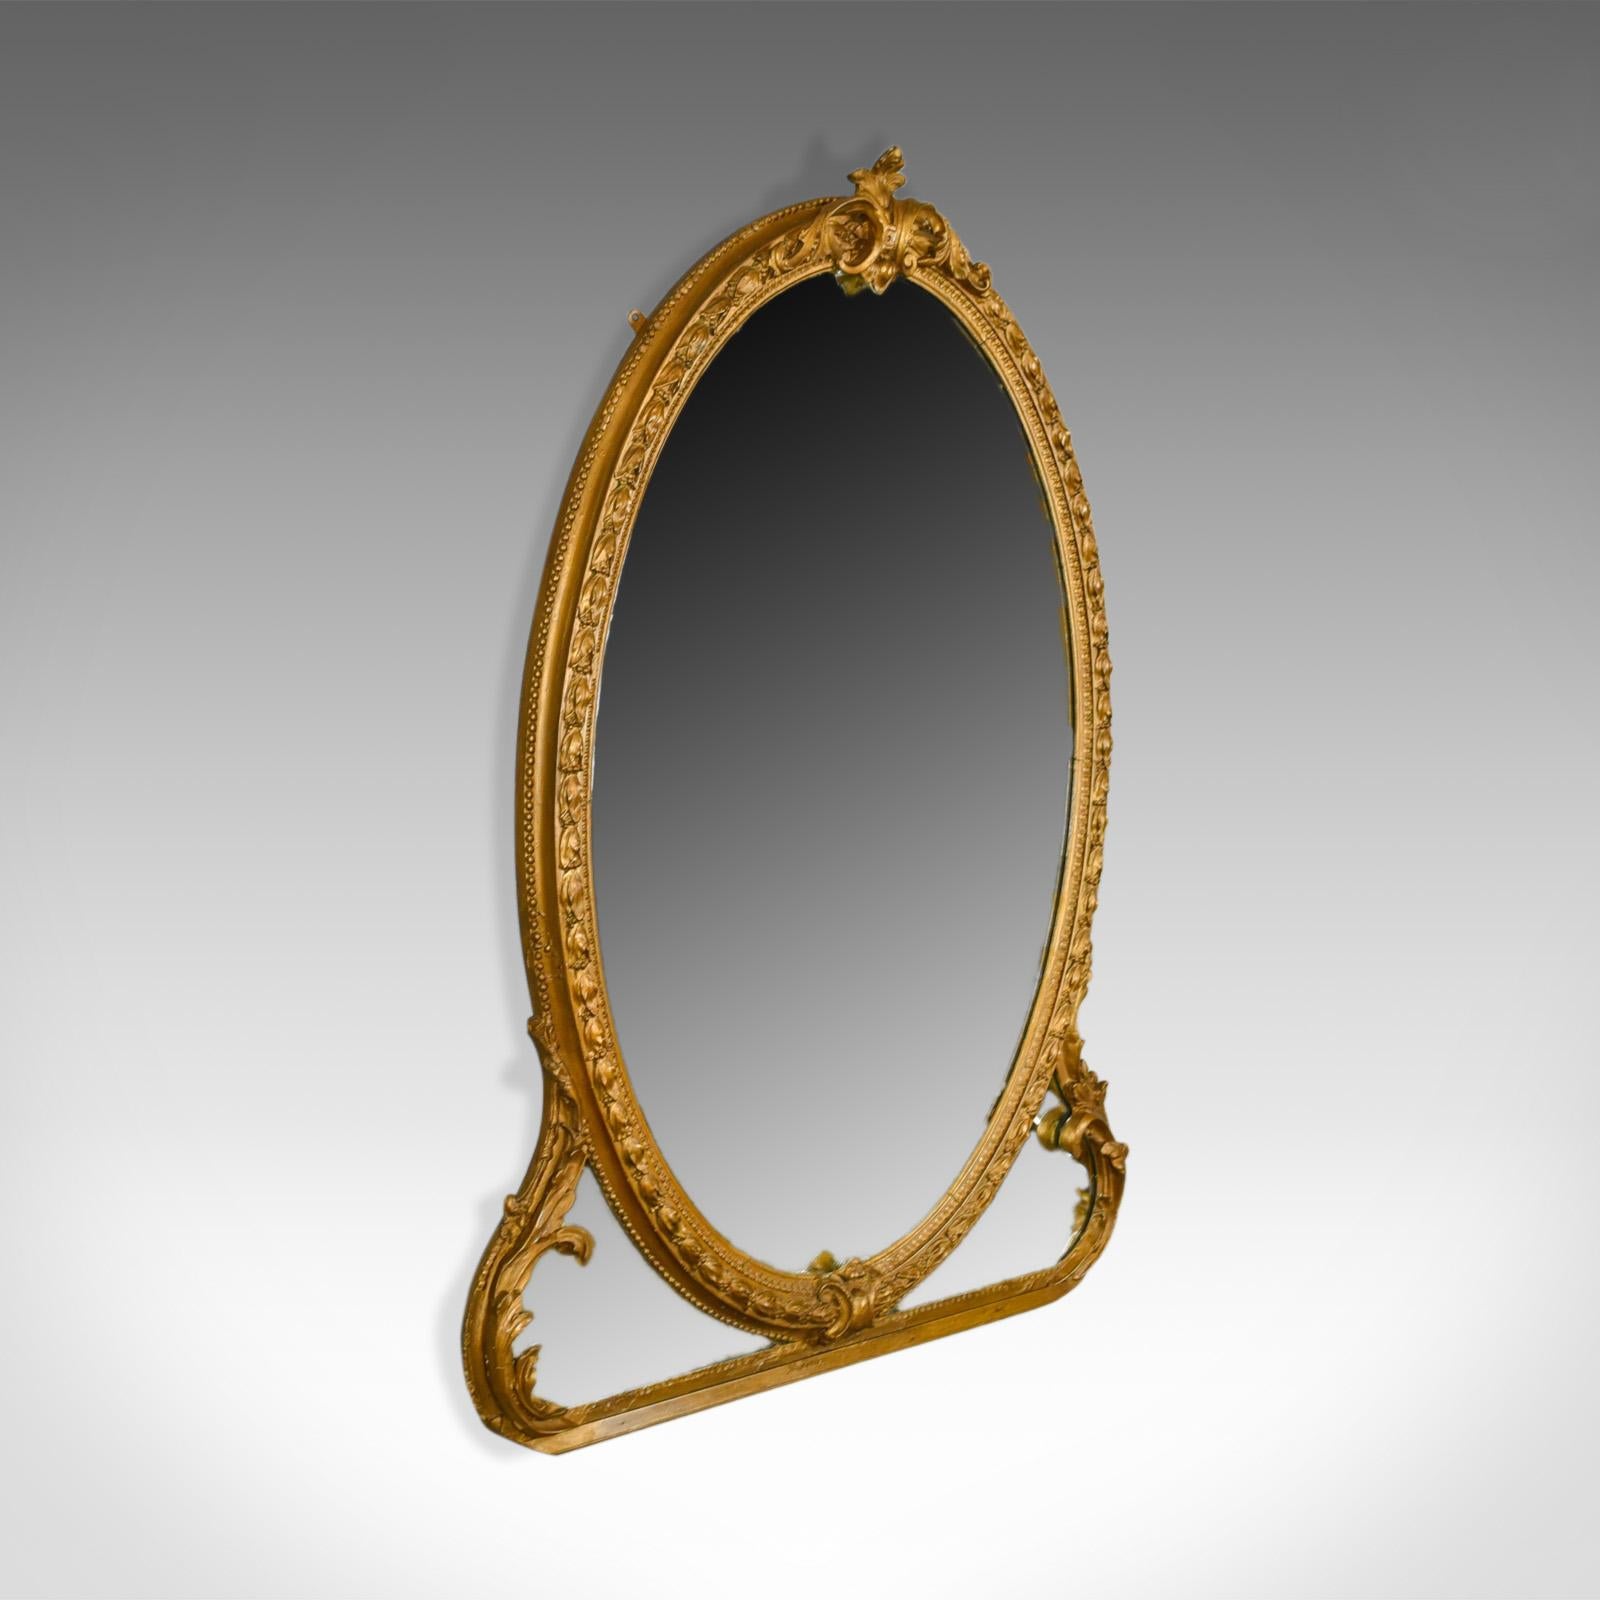 This is an antique wall mirror, an English Victorian, gilt gesso frame with later mirror plate, a 19th century overmantel mirror dating to circa 1850.

A super period gilt gesso frame
Victorian in the classical taste
Decorated with scrolls,